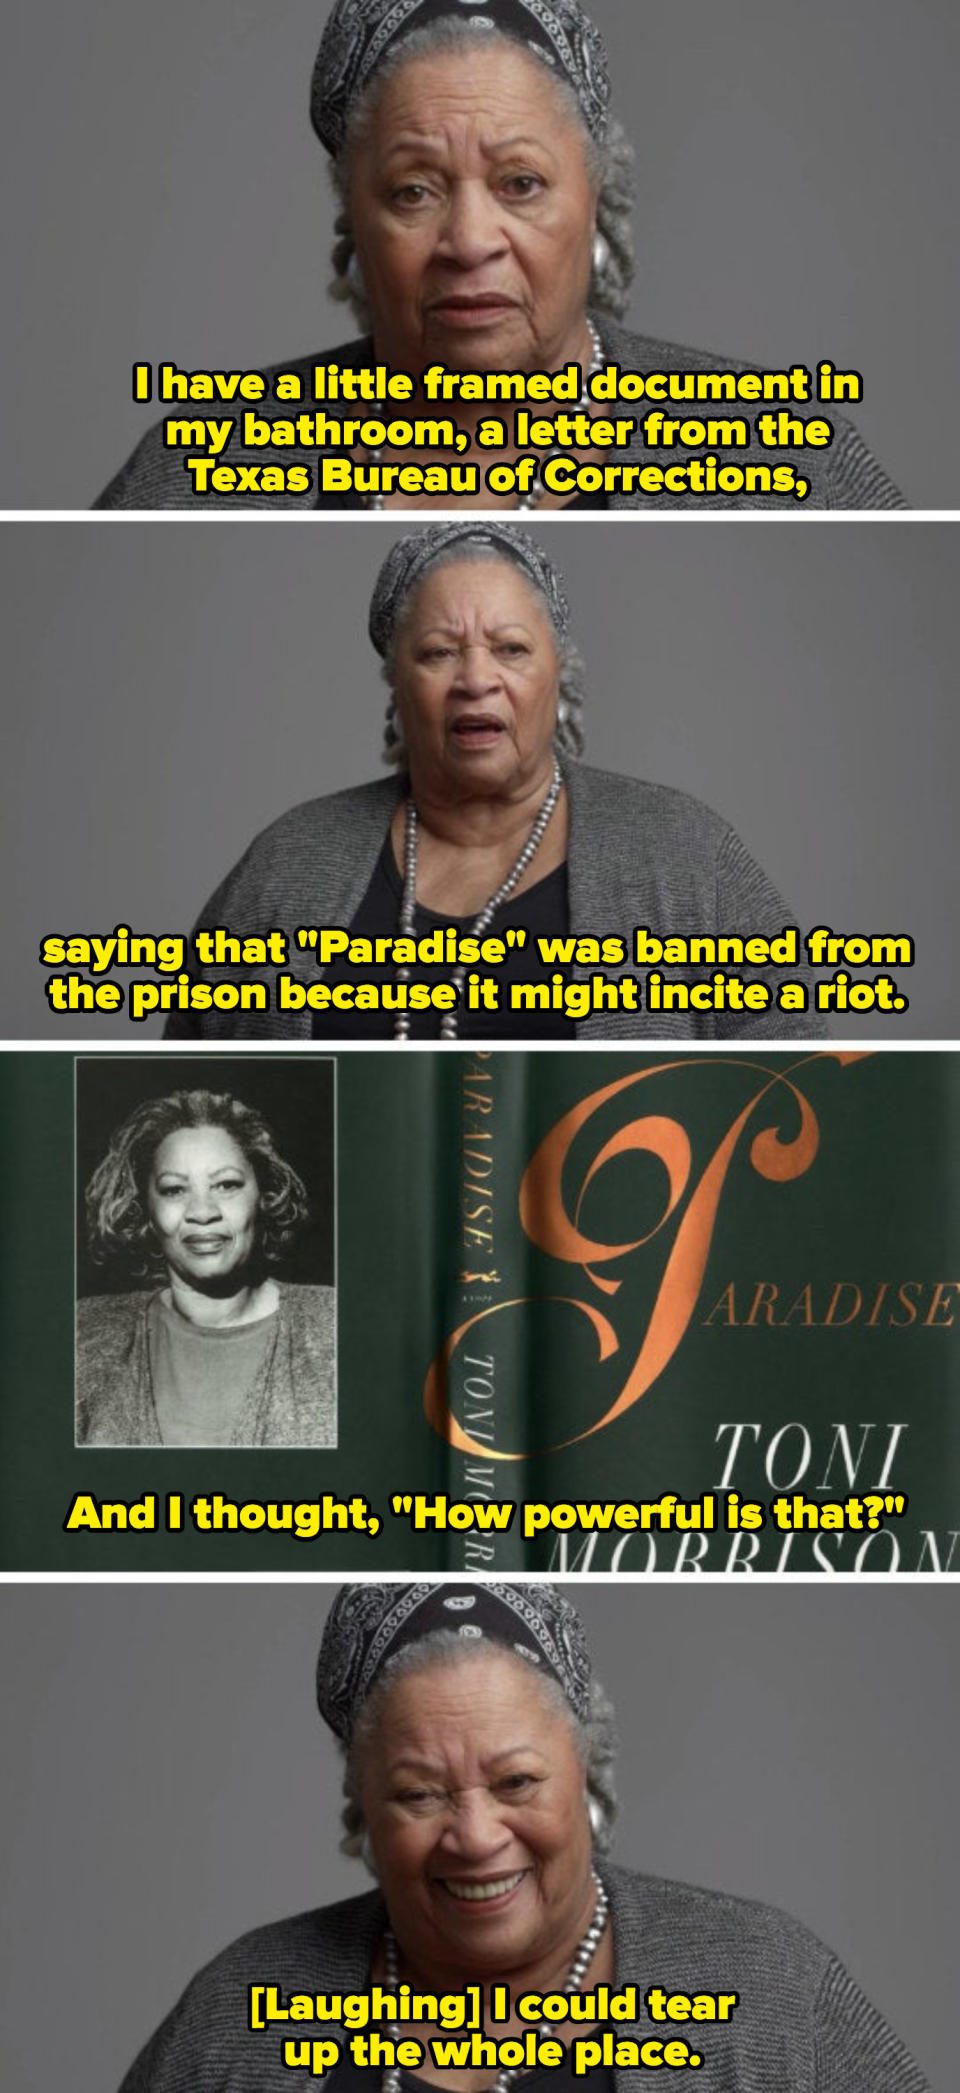 Toni Morrison discussing a Texas prison banning her novel "Paradise," saying: "And I thought, 'How powerful is that?' I could tear up the whole place"